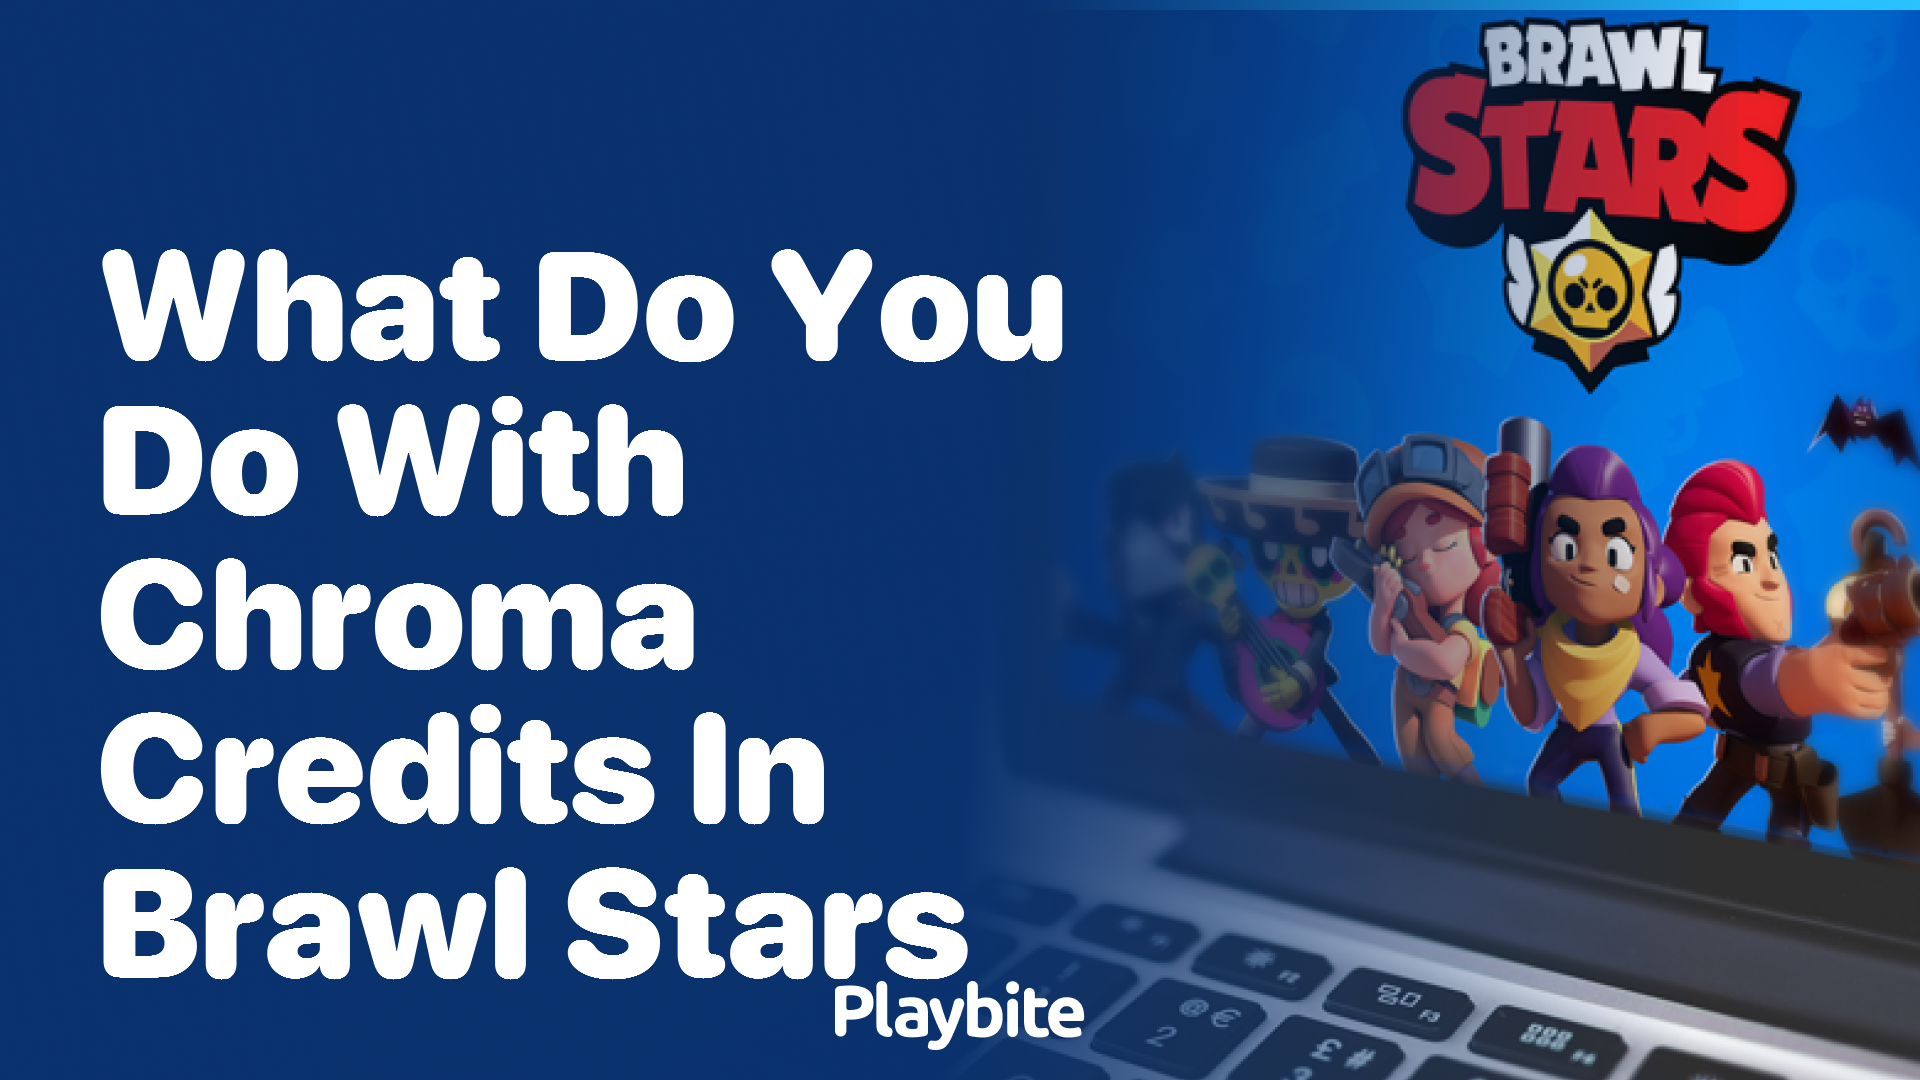 What Can You Do With Chroma Credits in Brawl Stars?